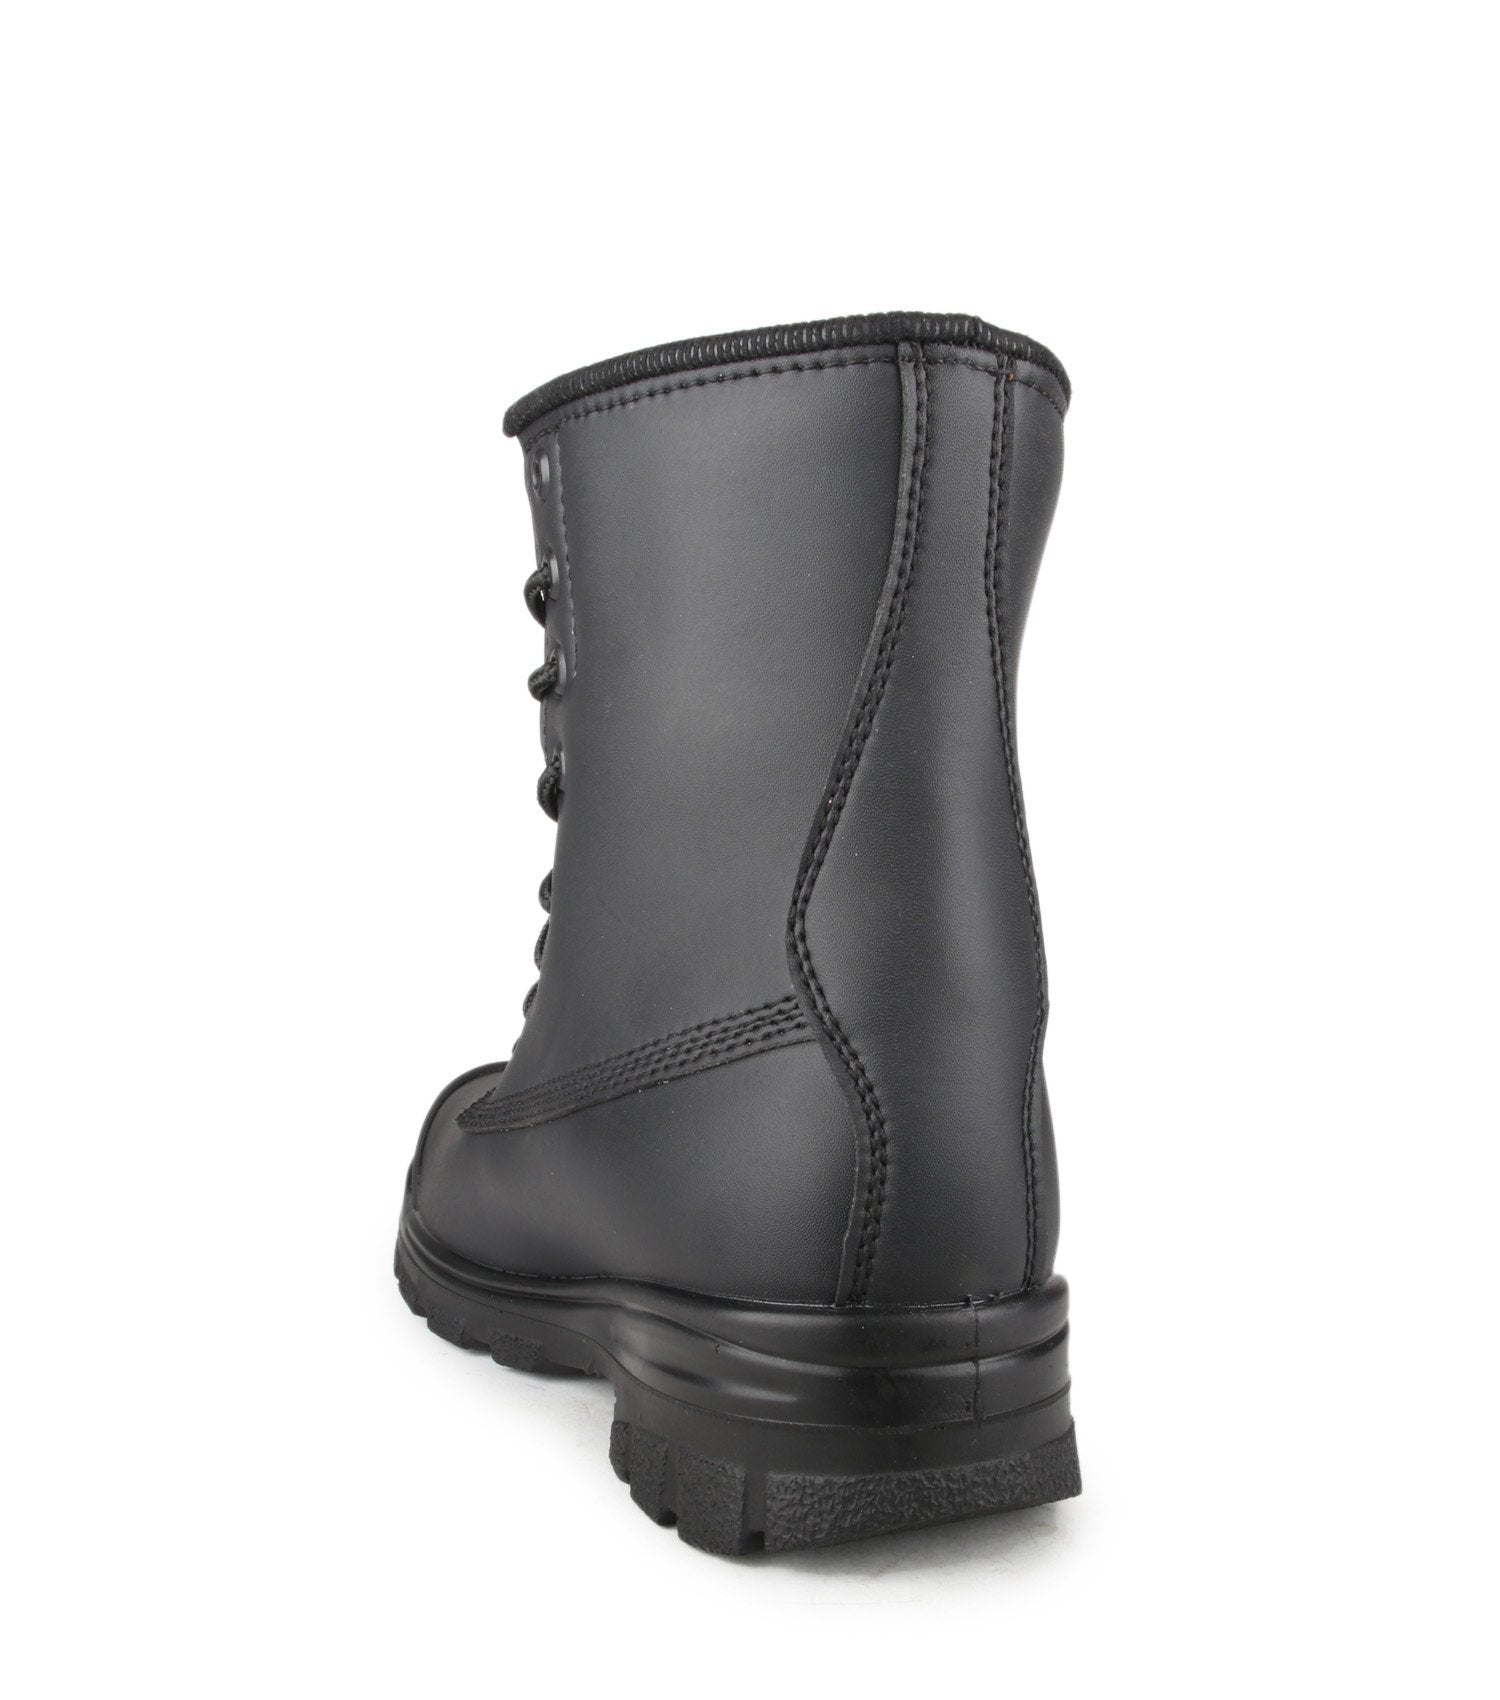 STC Keep 8" Work Boots | Black | Sizes 5 - 14 Work Boots - Cleanflow